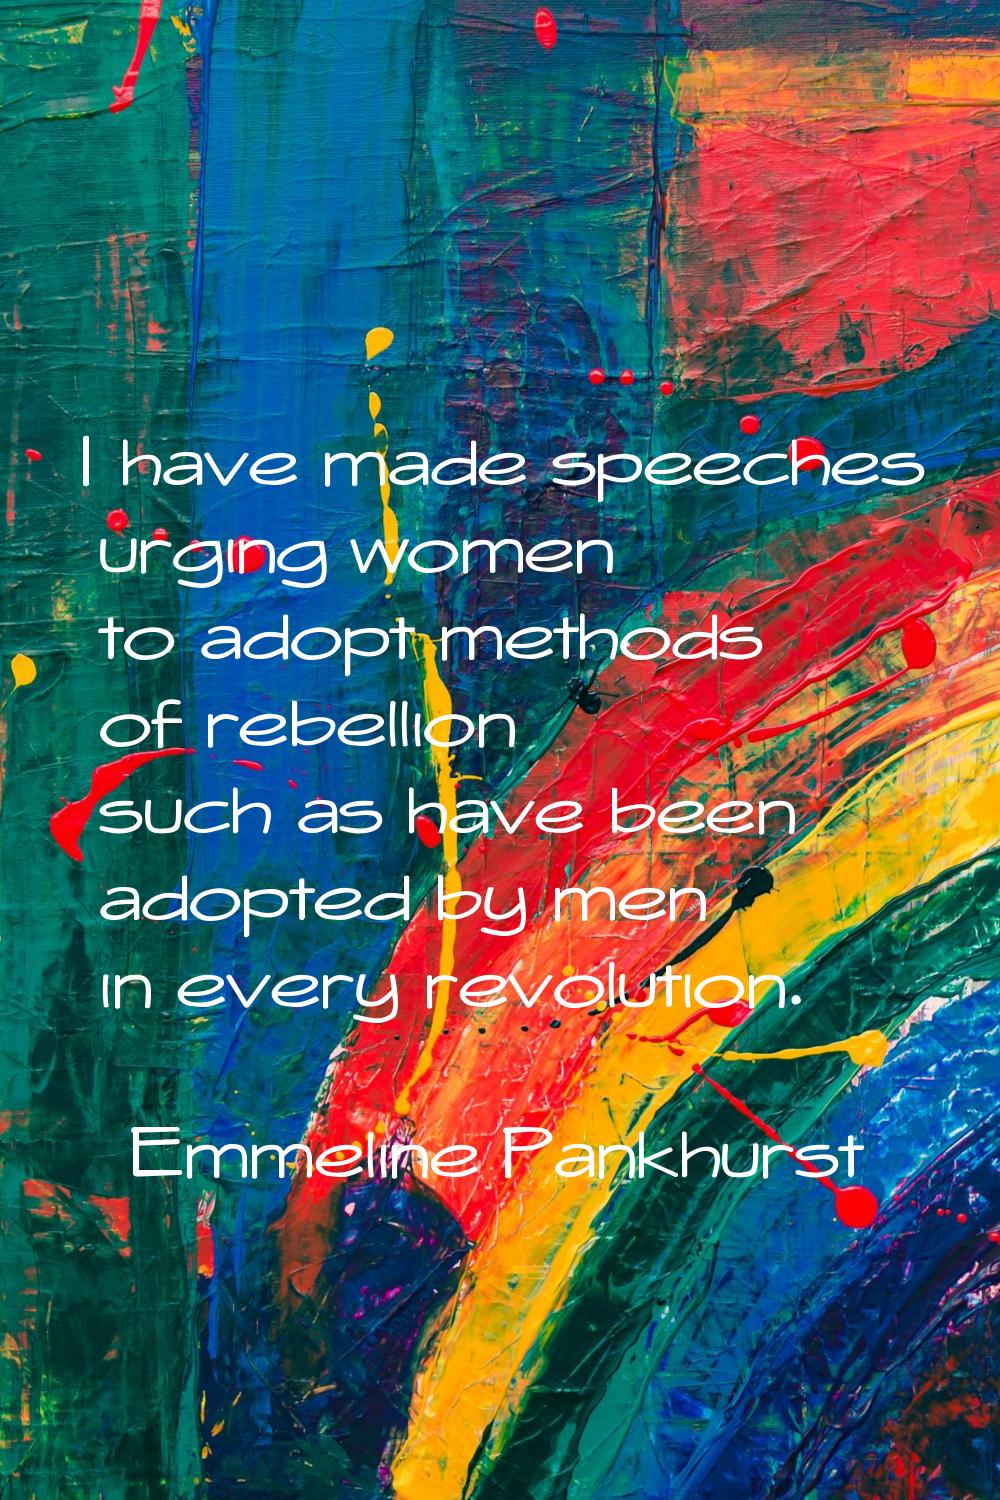 I have made speeches urging women to adopt methods of rebellion such as have been adopted by men in